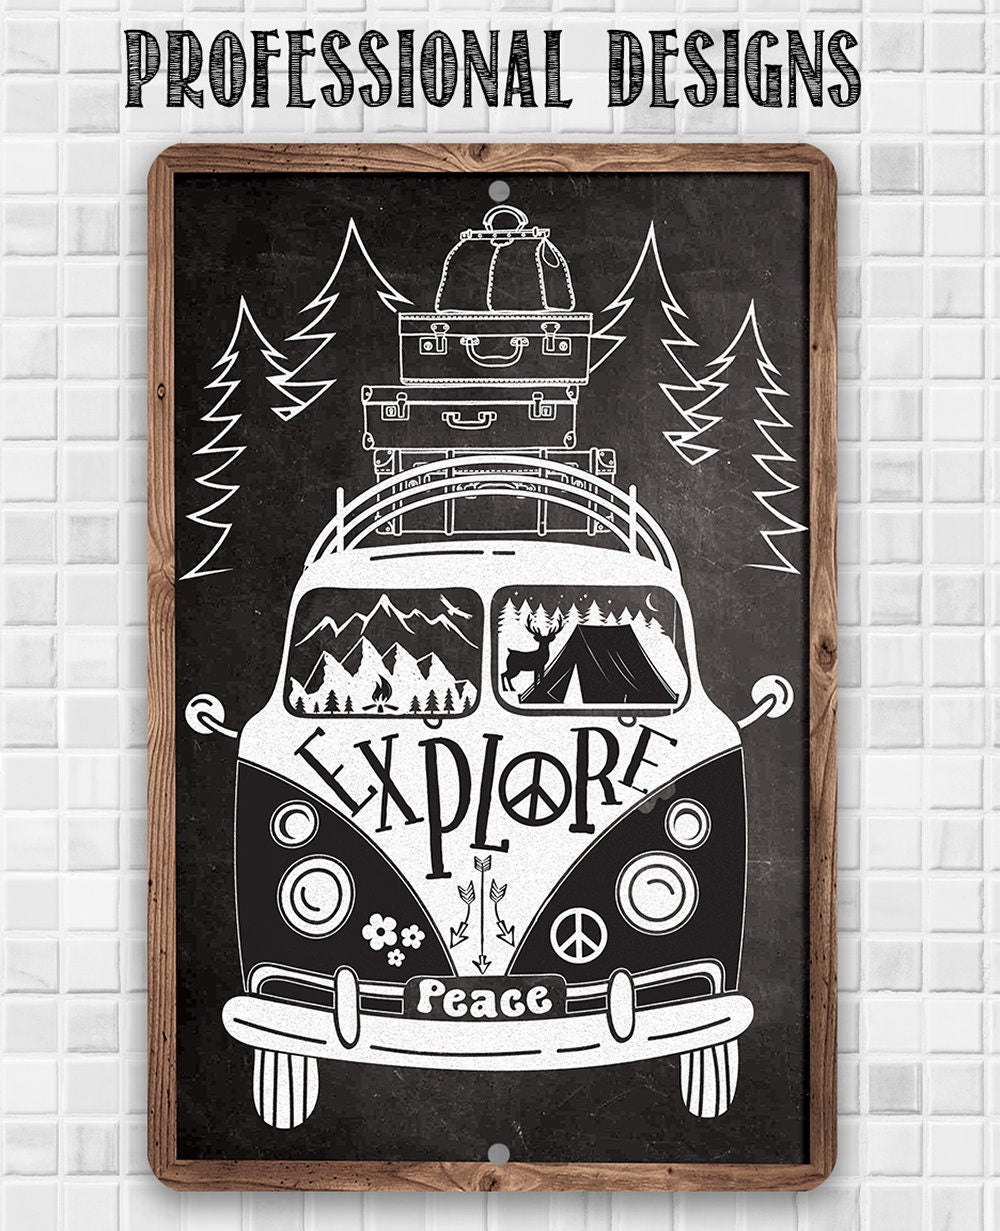 Explore in a Volkswagen, Peace - 8" x 12" or 12" x 18" Aluminum Tin Awesome Metal Poster Lone Star Art 